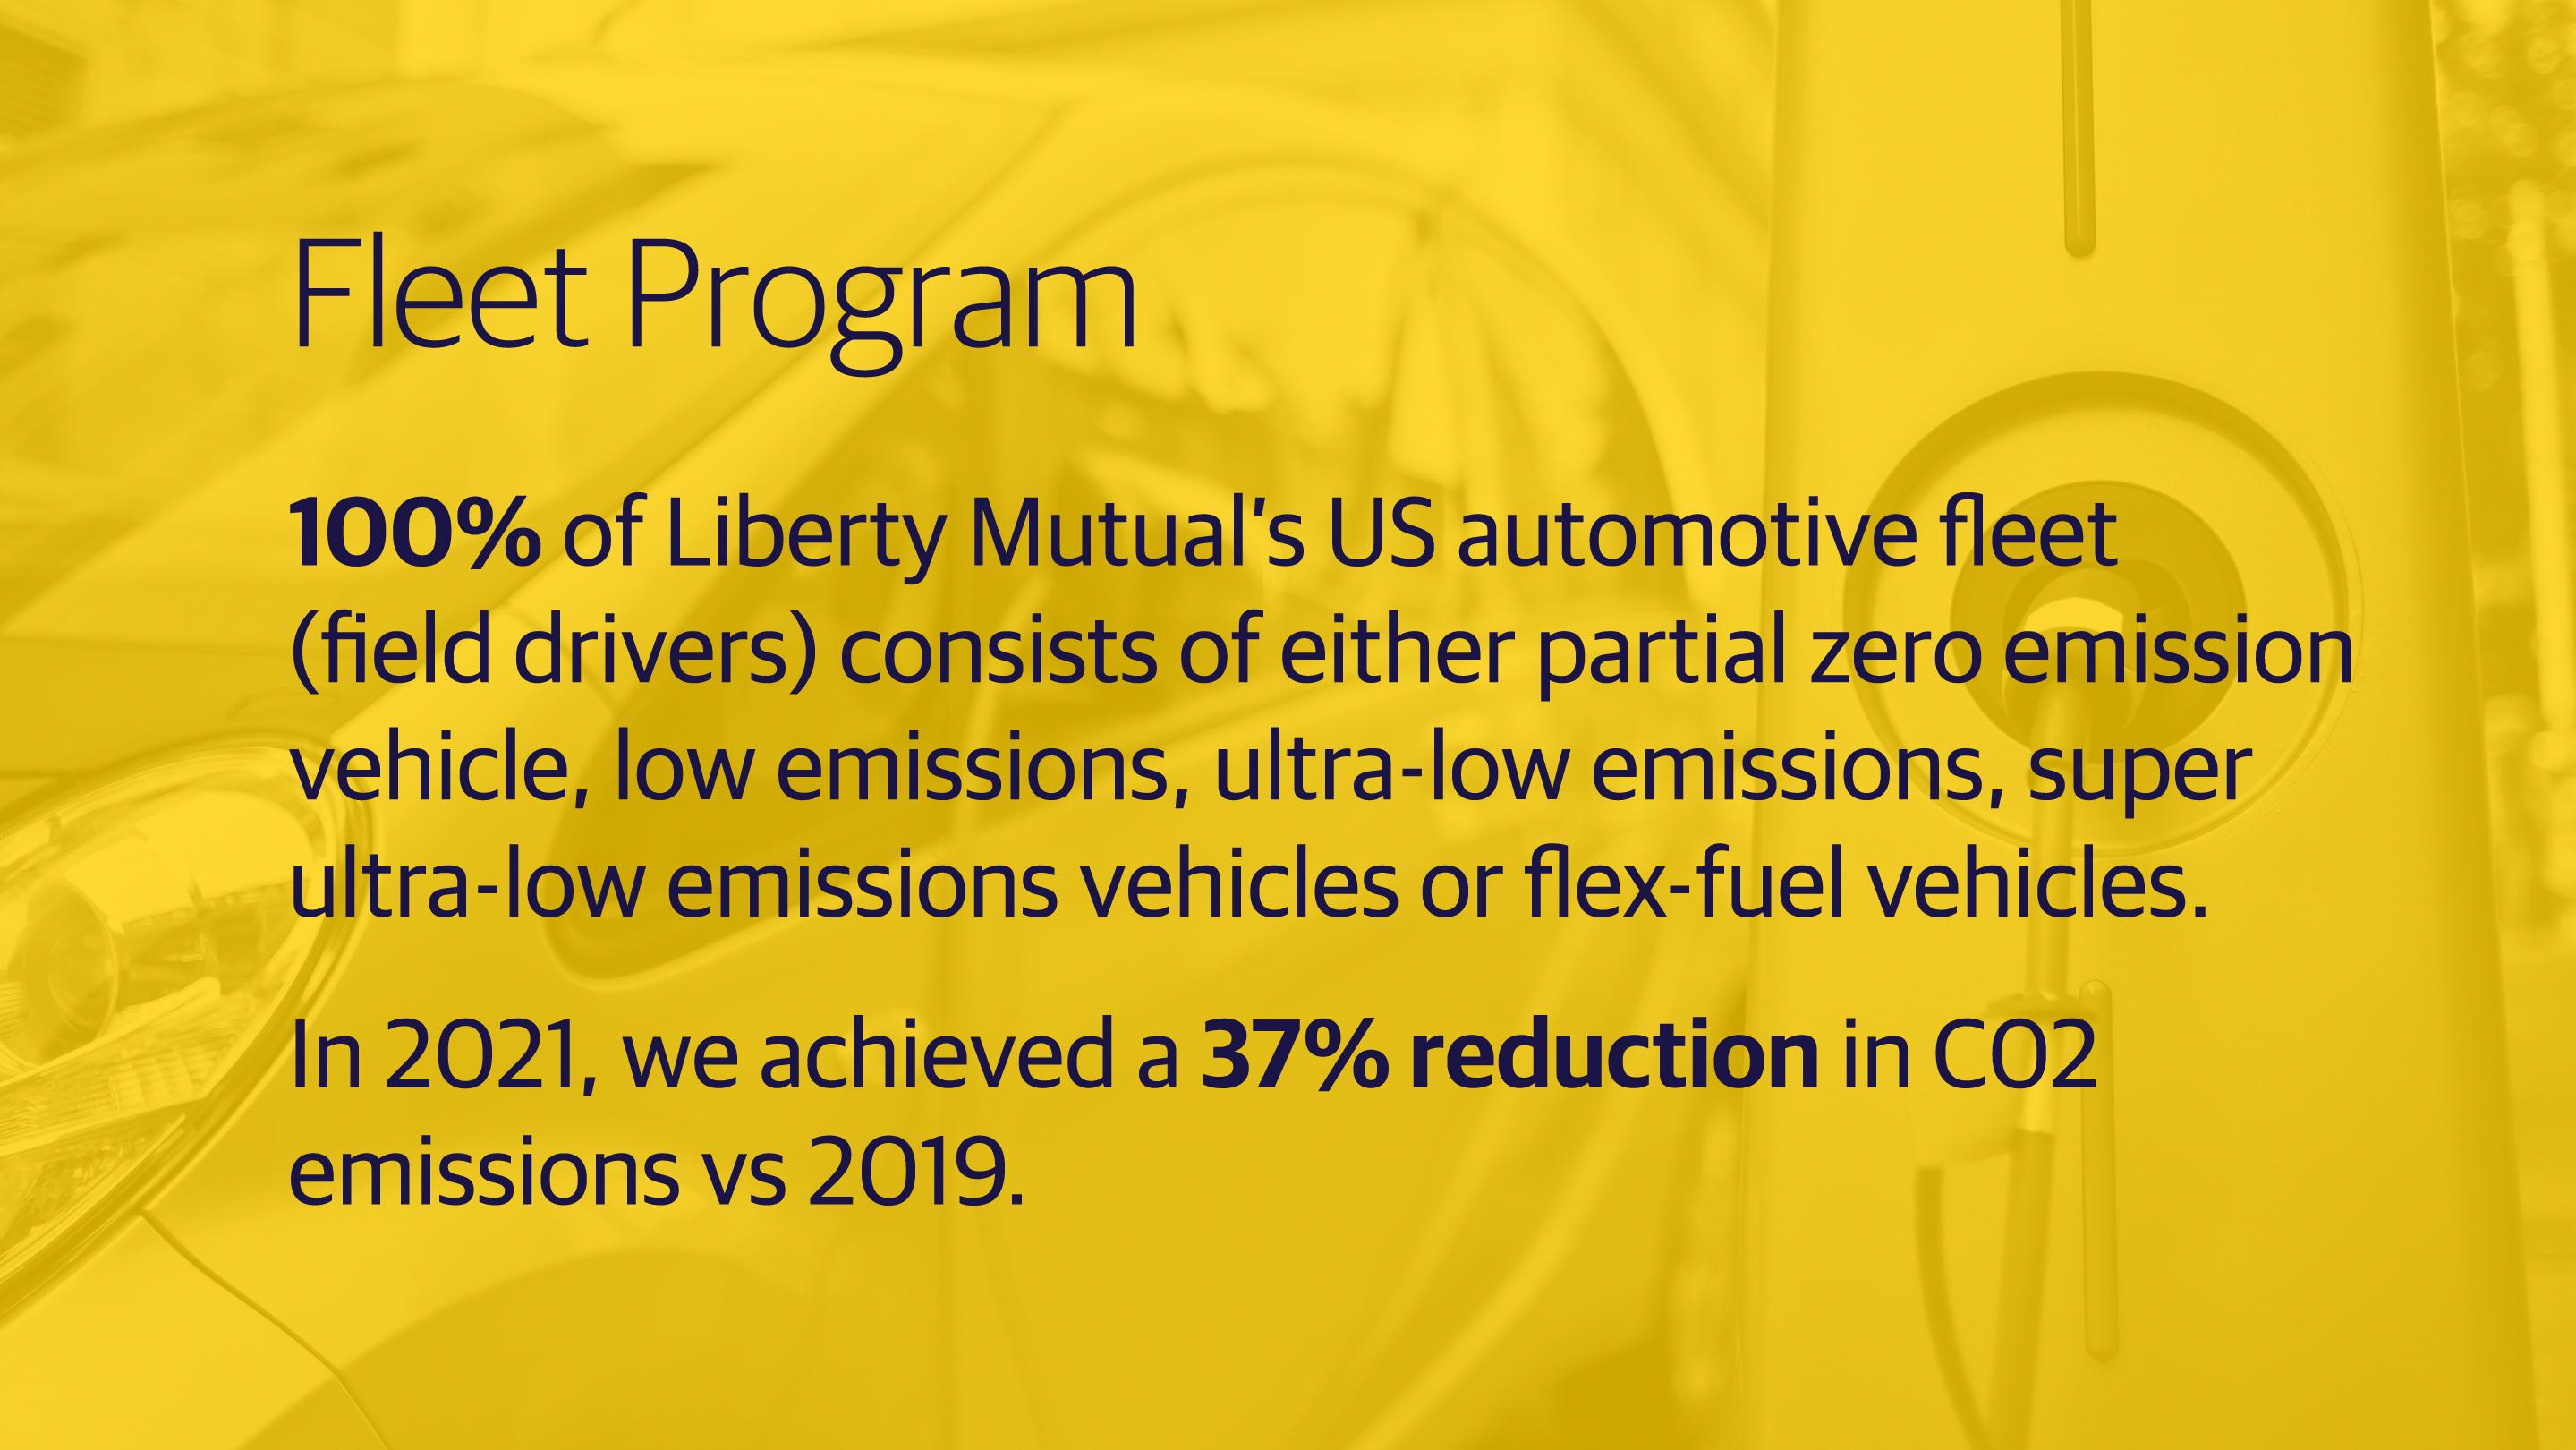 (slide 1 of 3) 100% of Liberty Mutual’s US automotive fleet (field drivers) consists of either partial zero emission vehicle, low emissions, ultra-low emissions, super ultra-low emissions vehicles or flex-fuel vehicles. In 2021, we achieved a 37% reduction in C02 emissions vs 2019.. 